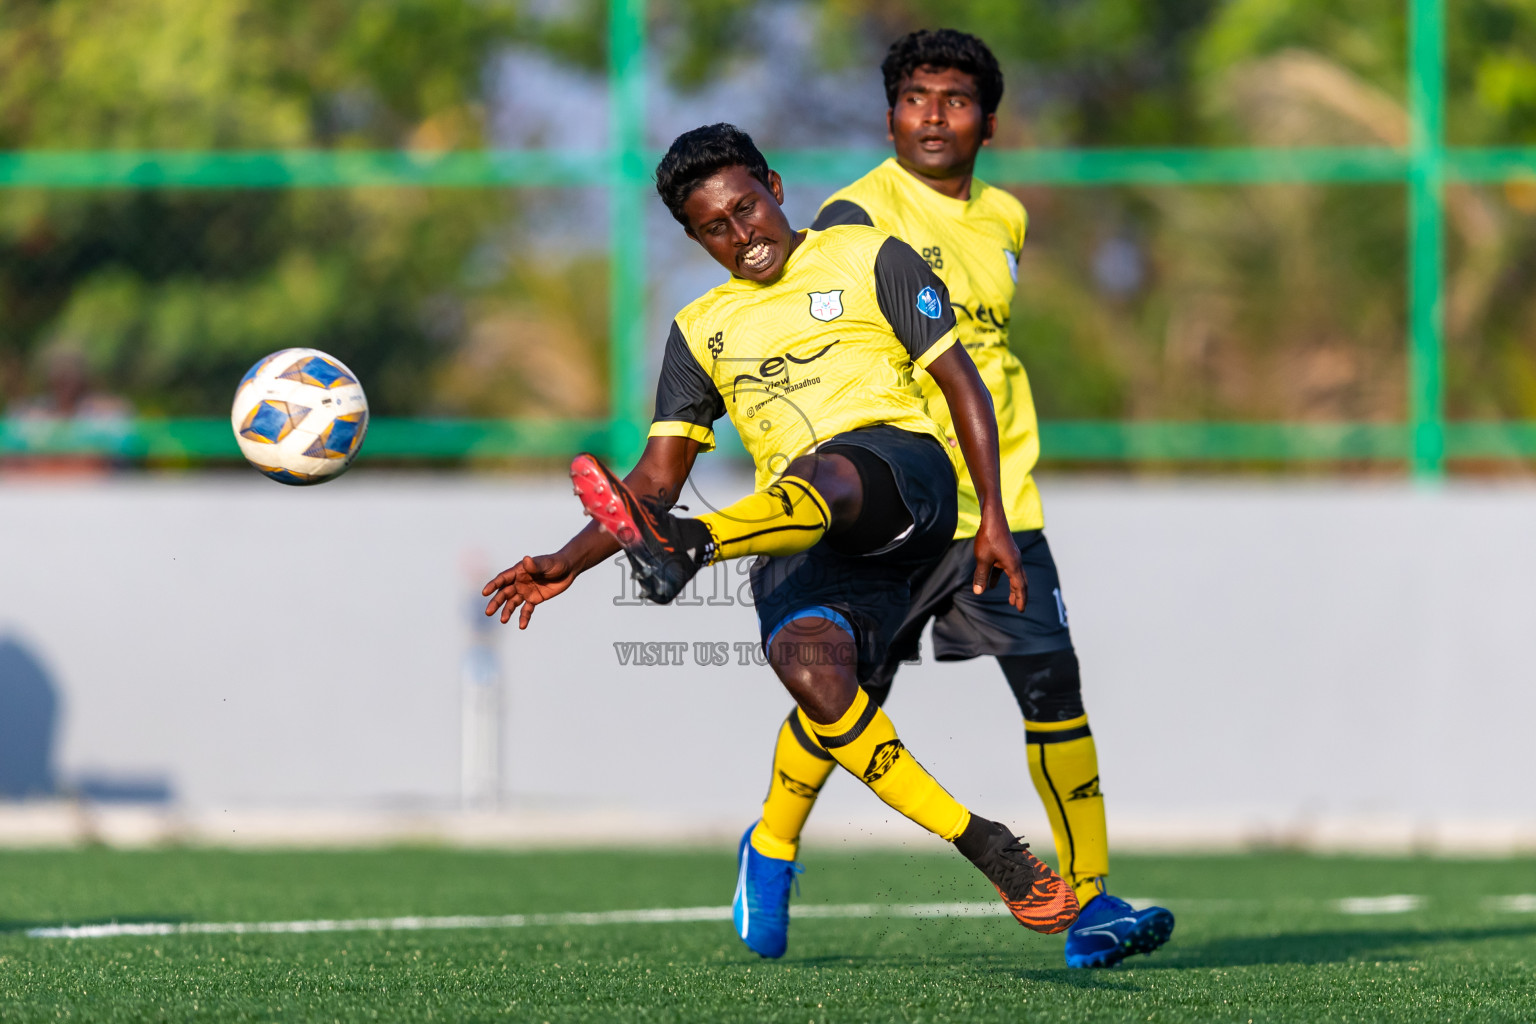 Kanmathi Juniors vs Furious SC from Manadhoo Council Cup 2024 in N Manadhoo Maldives on Monday, 19th February 2023. Photos: Nausham Waheed / images.mv